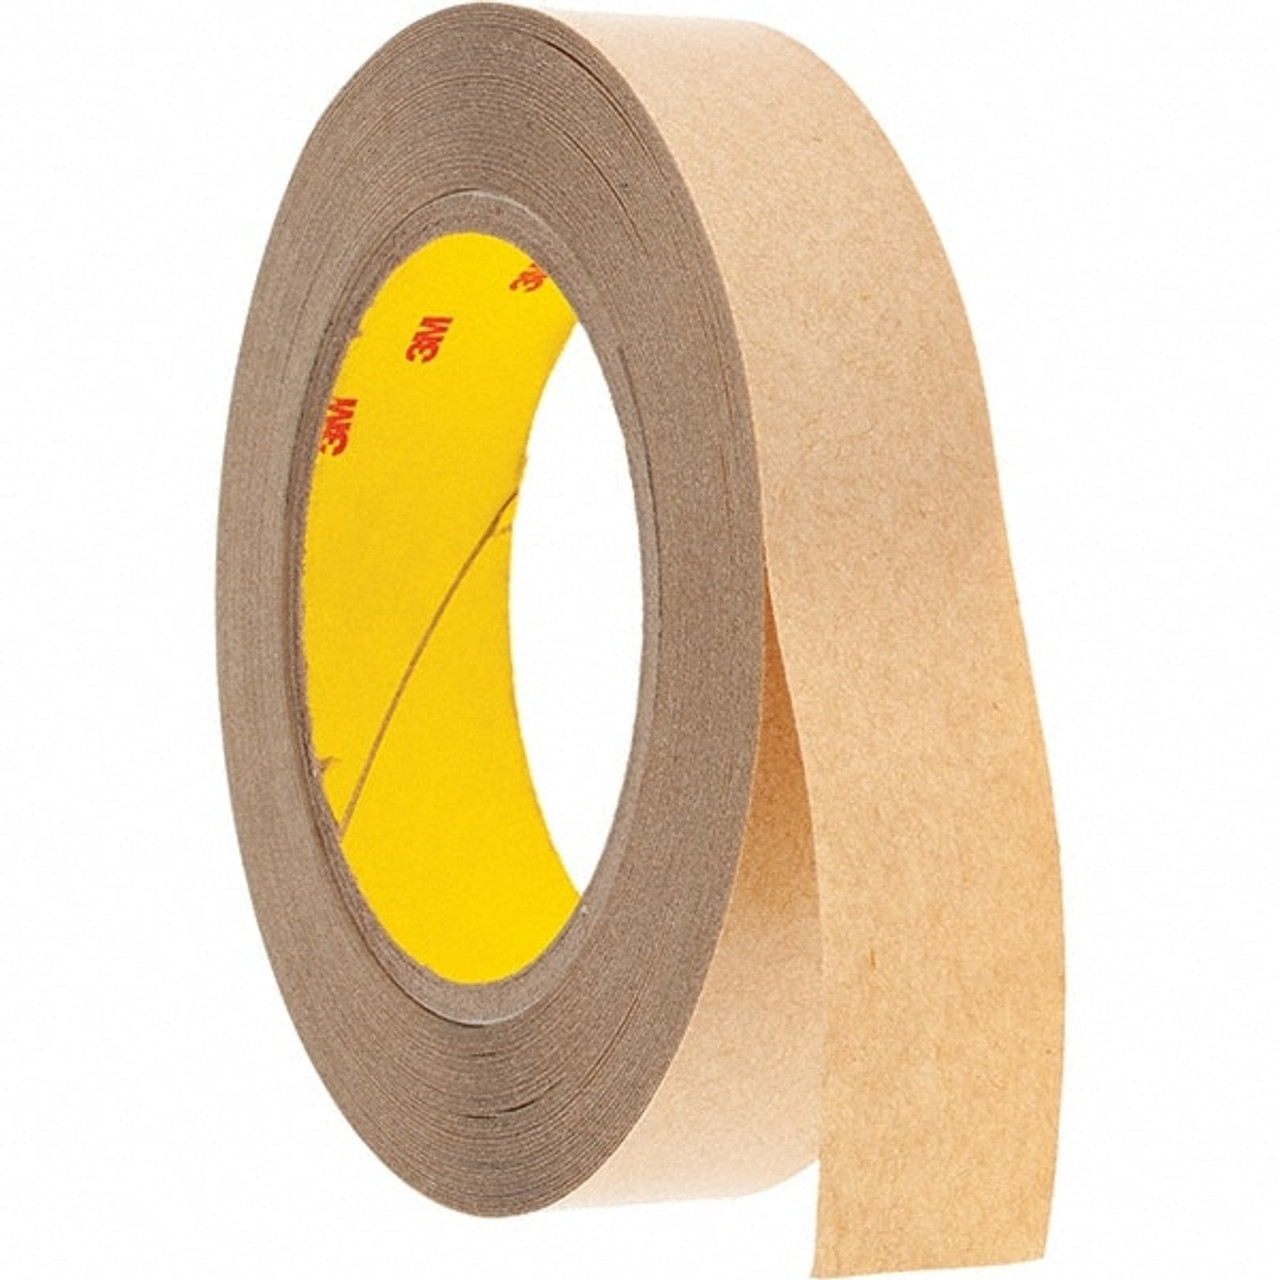 3M 444 Double Sided Tape,1/2 in x 36 yd.,Clear